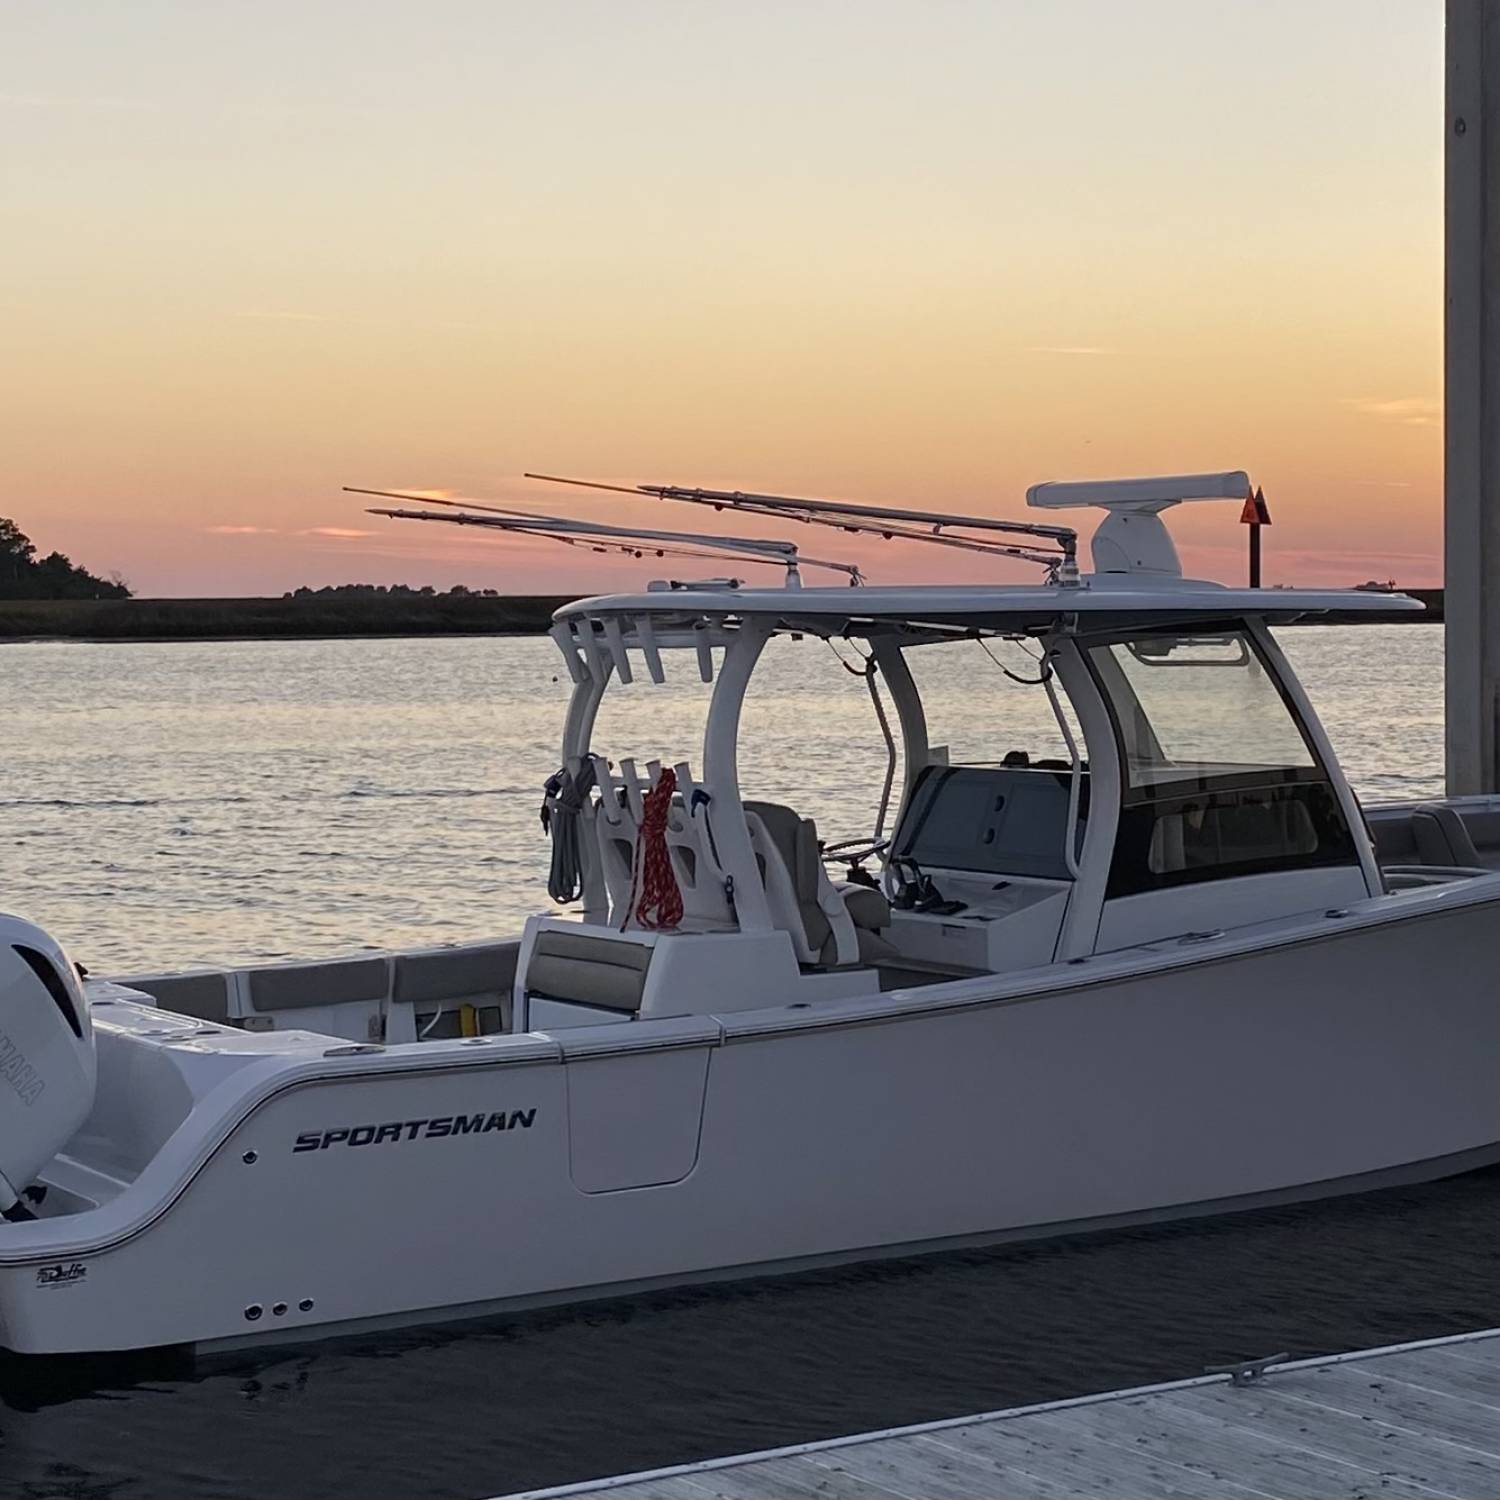 Title: Knot Today - On board their Sportsman Open 352 Center Console - Location: Steinhatchee. Participating in the Photo Contest #SportsmanMarch2023